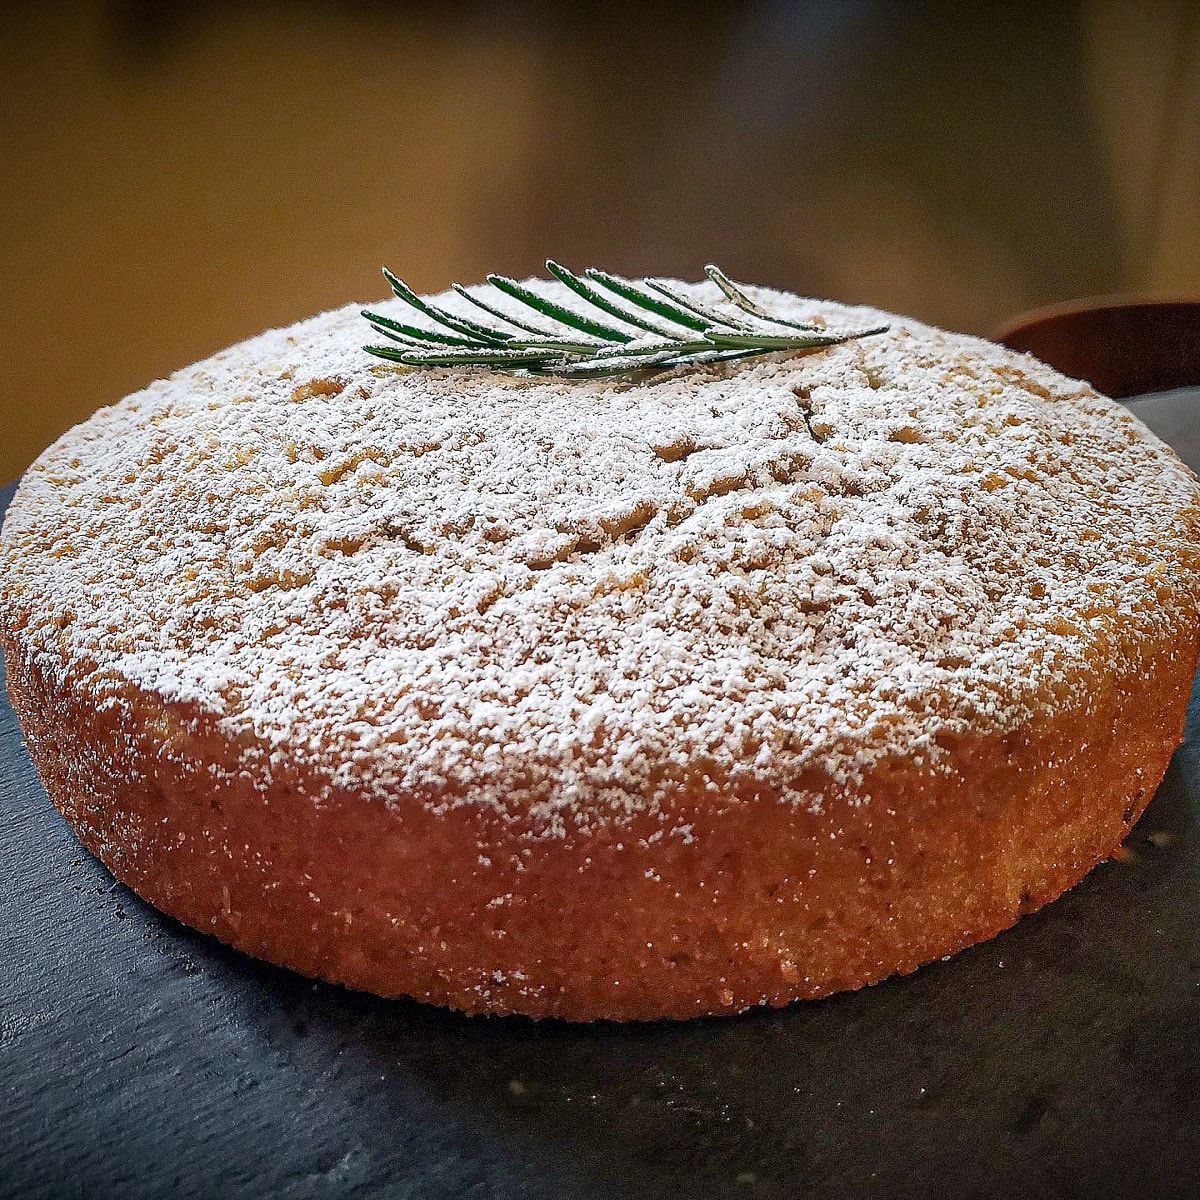 rosemary olive oil cake topped with rosemary